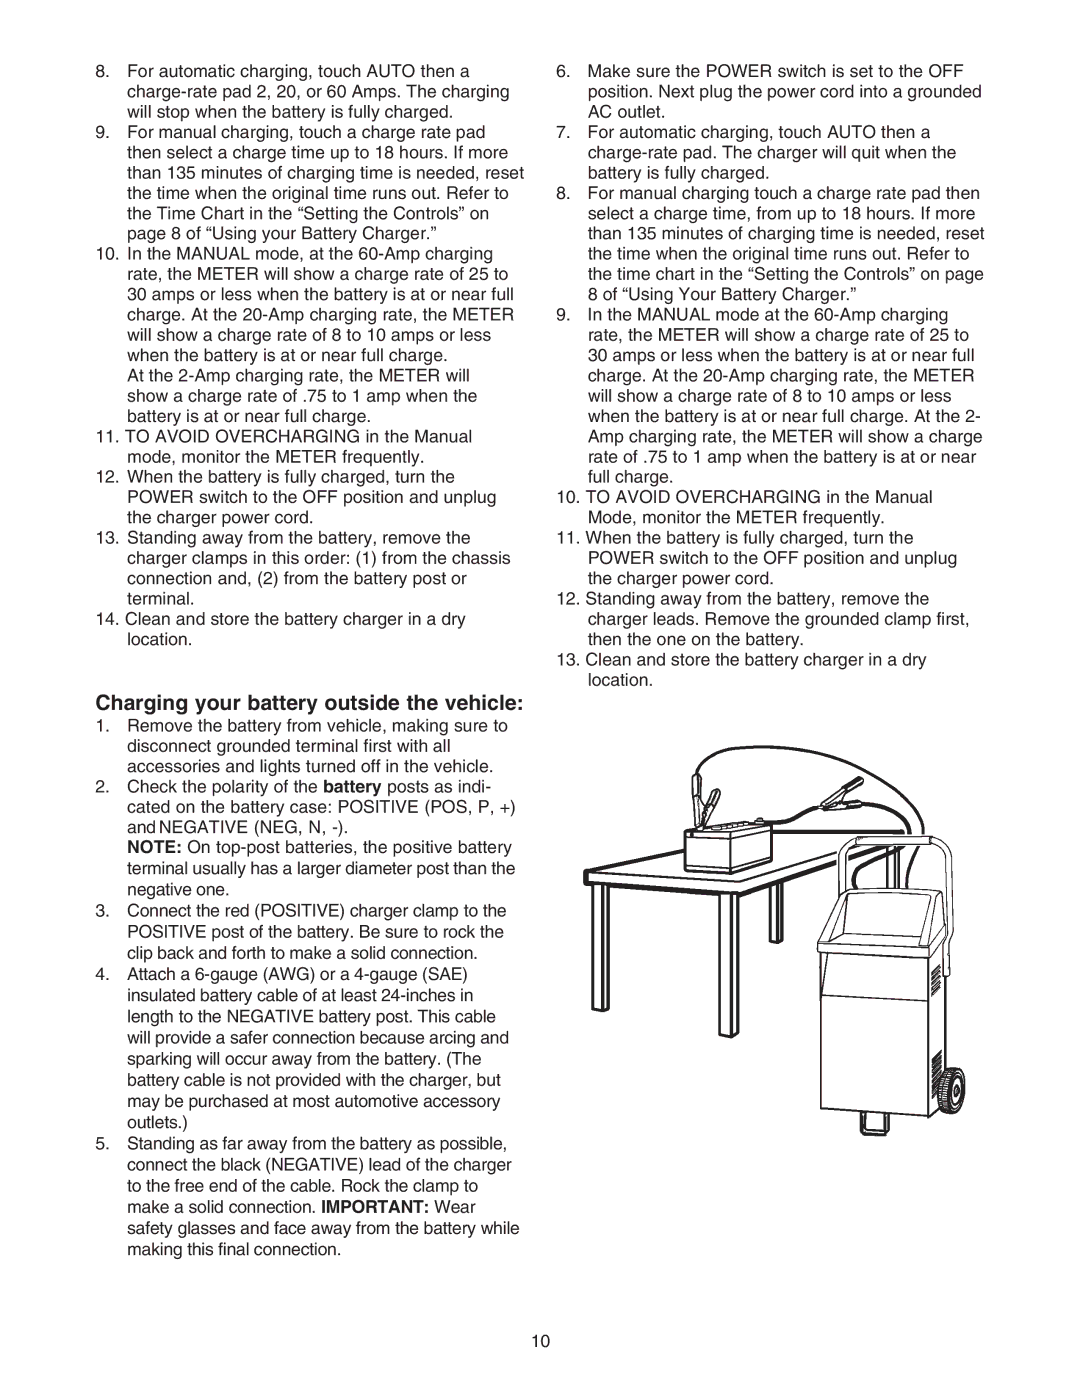 Sears 200.71232 owner manual Charging your battery outside the vehicle 